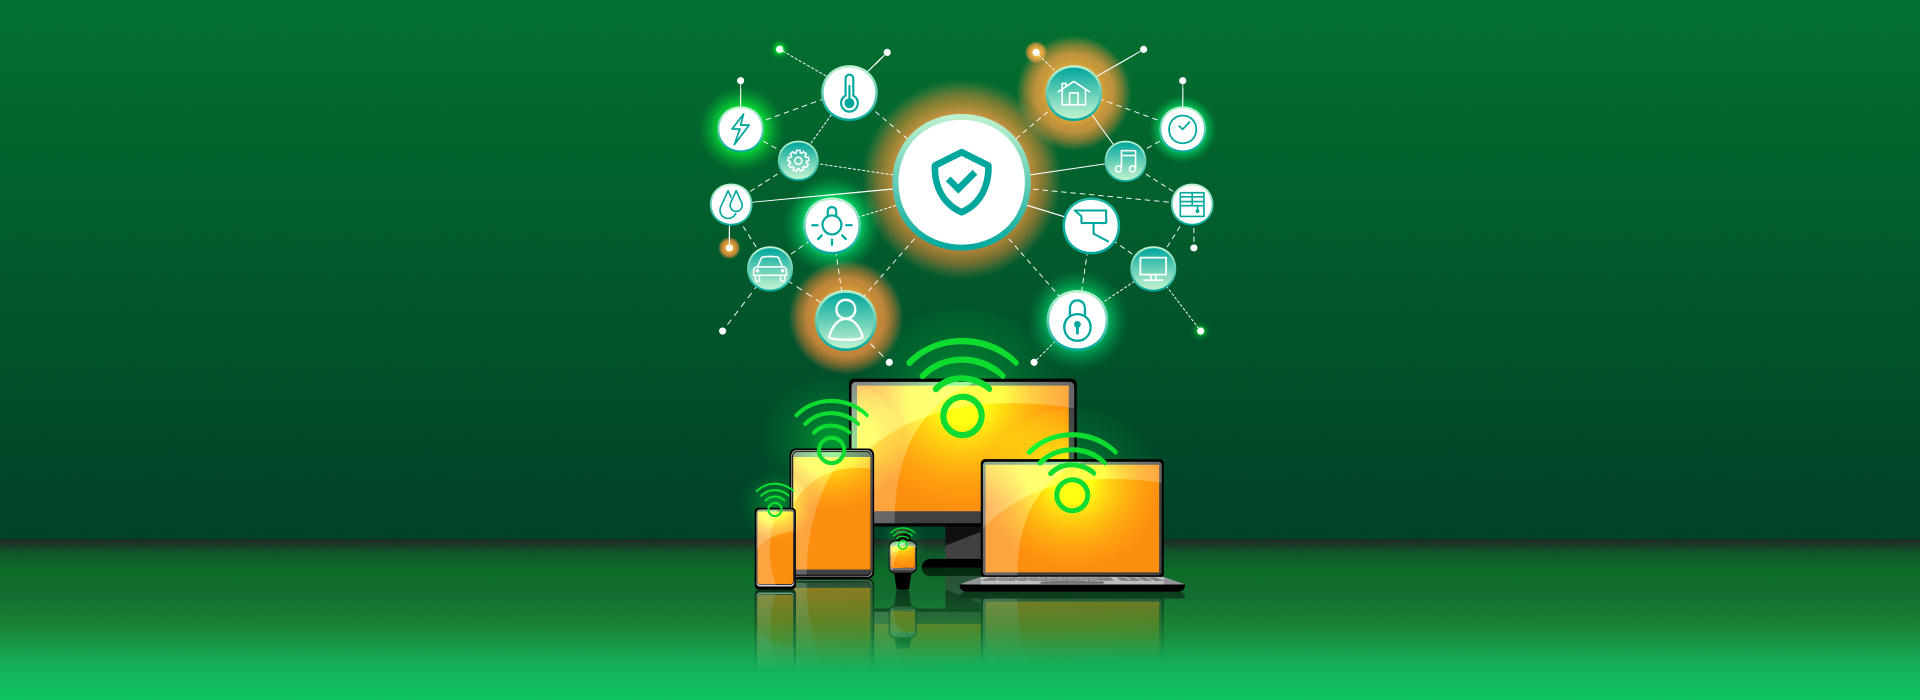 IoT Security Challenges and Best Practices